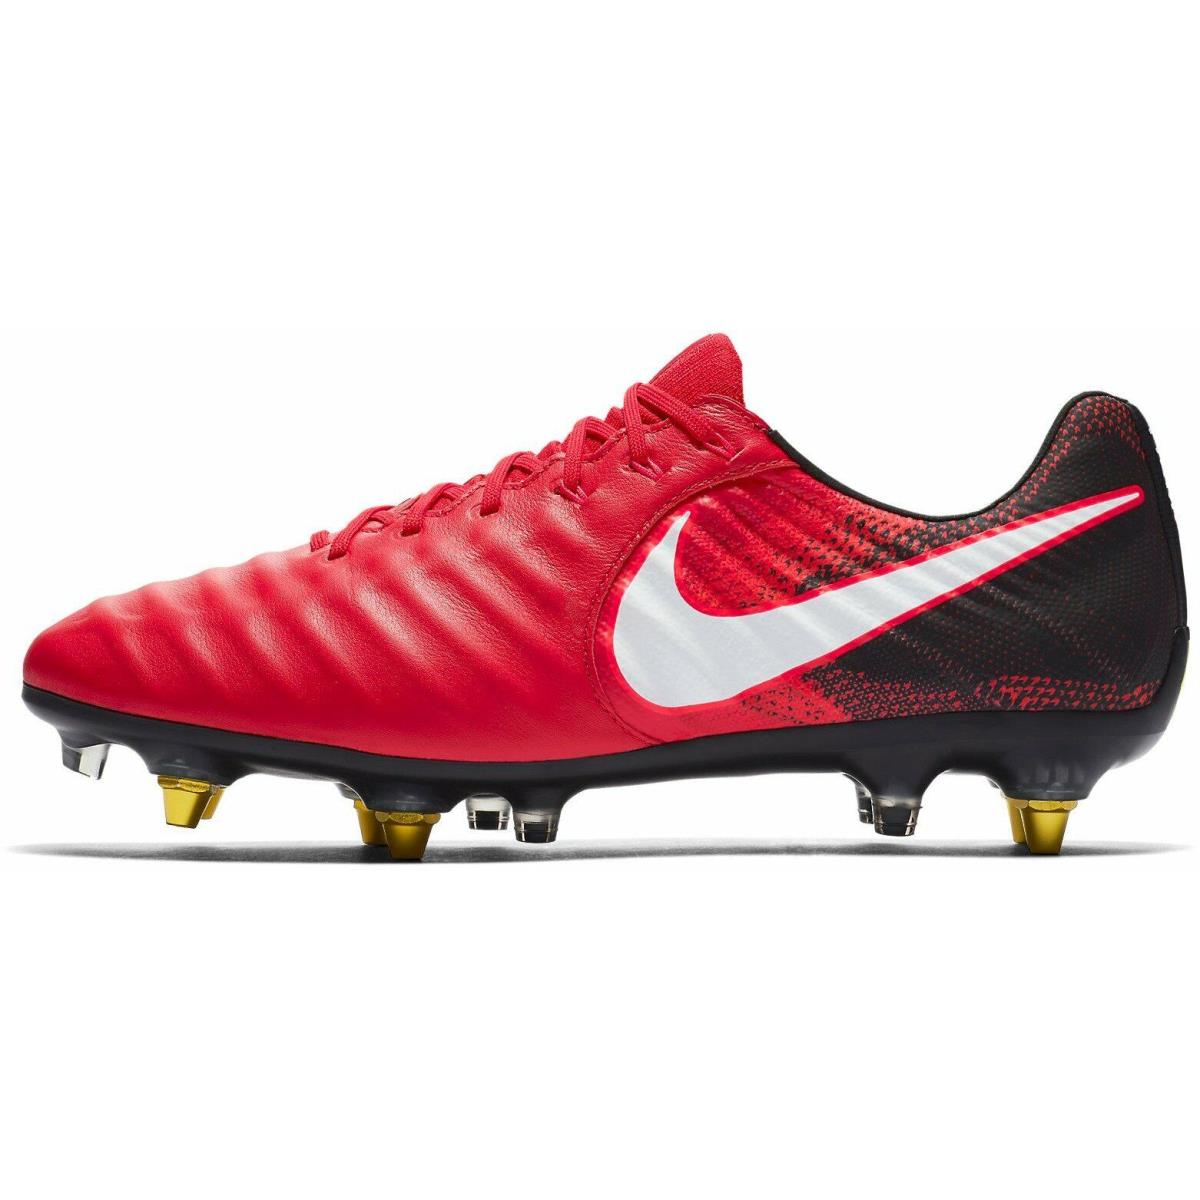 Nike Men`s Tiempo Legend Vii Sg-pro Acc Red Soccer Cleats 917805-616 Size 7.5 US